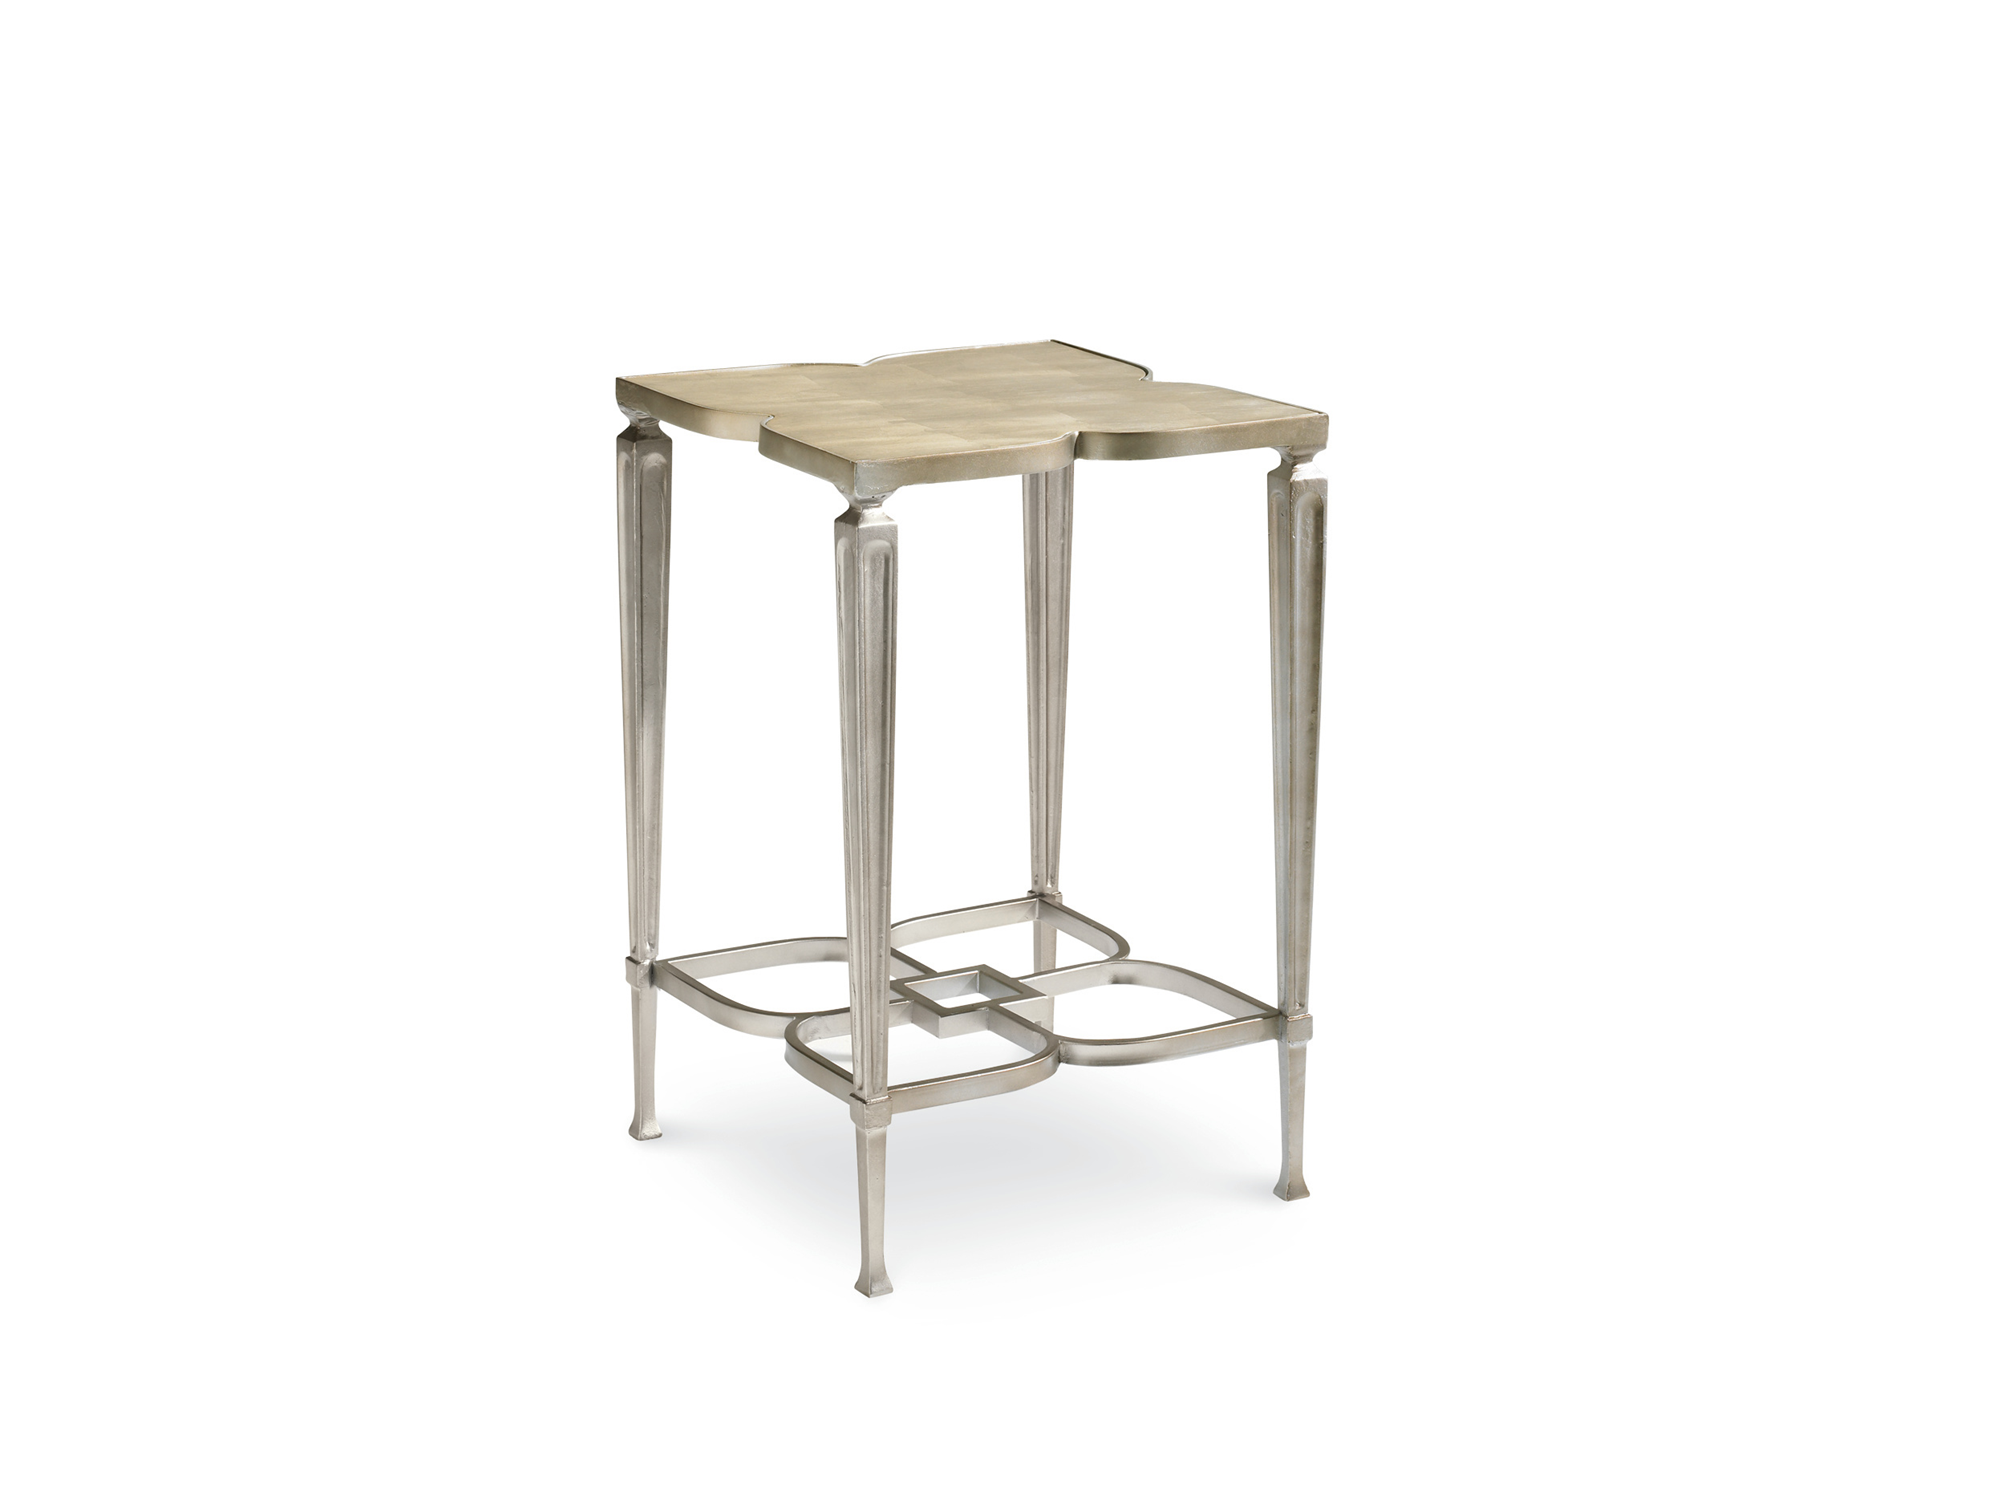 Babs Lucky Charm Side Table in Taupe Silver Leaf - Euro Living Furniture